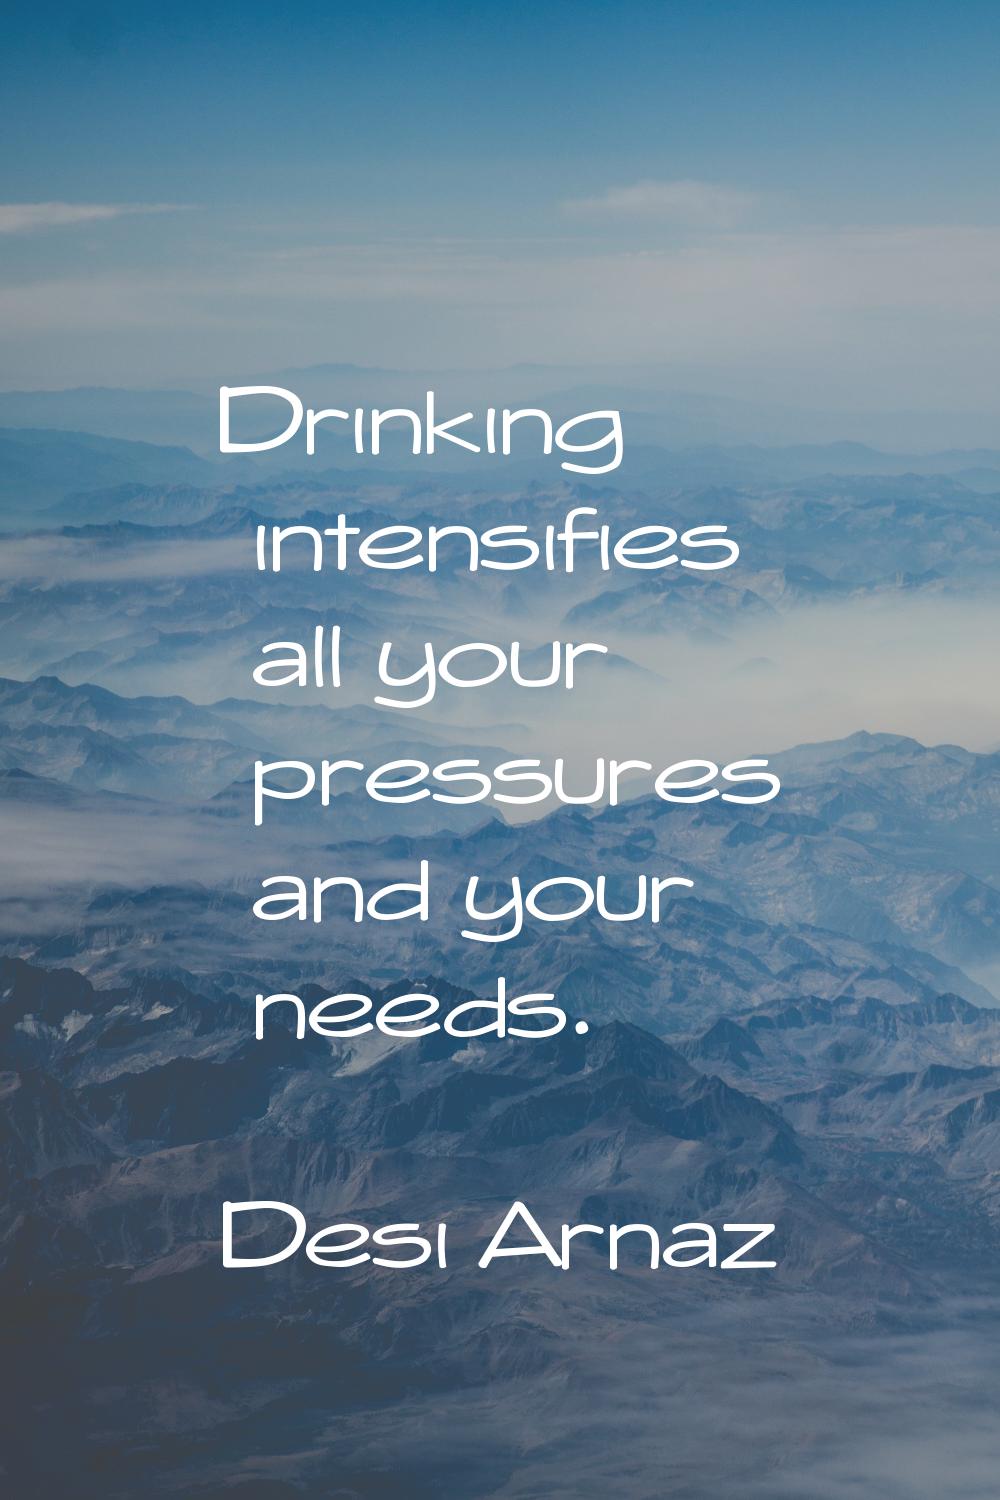 Drinking intensifies all your pressures and your needs.